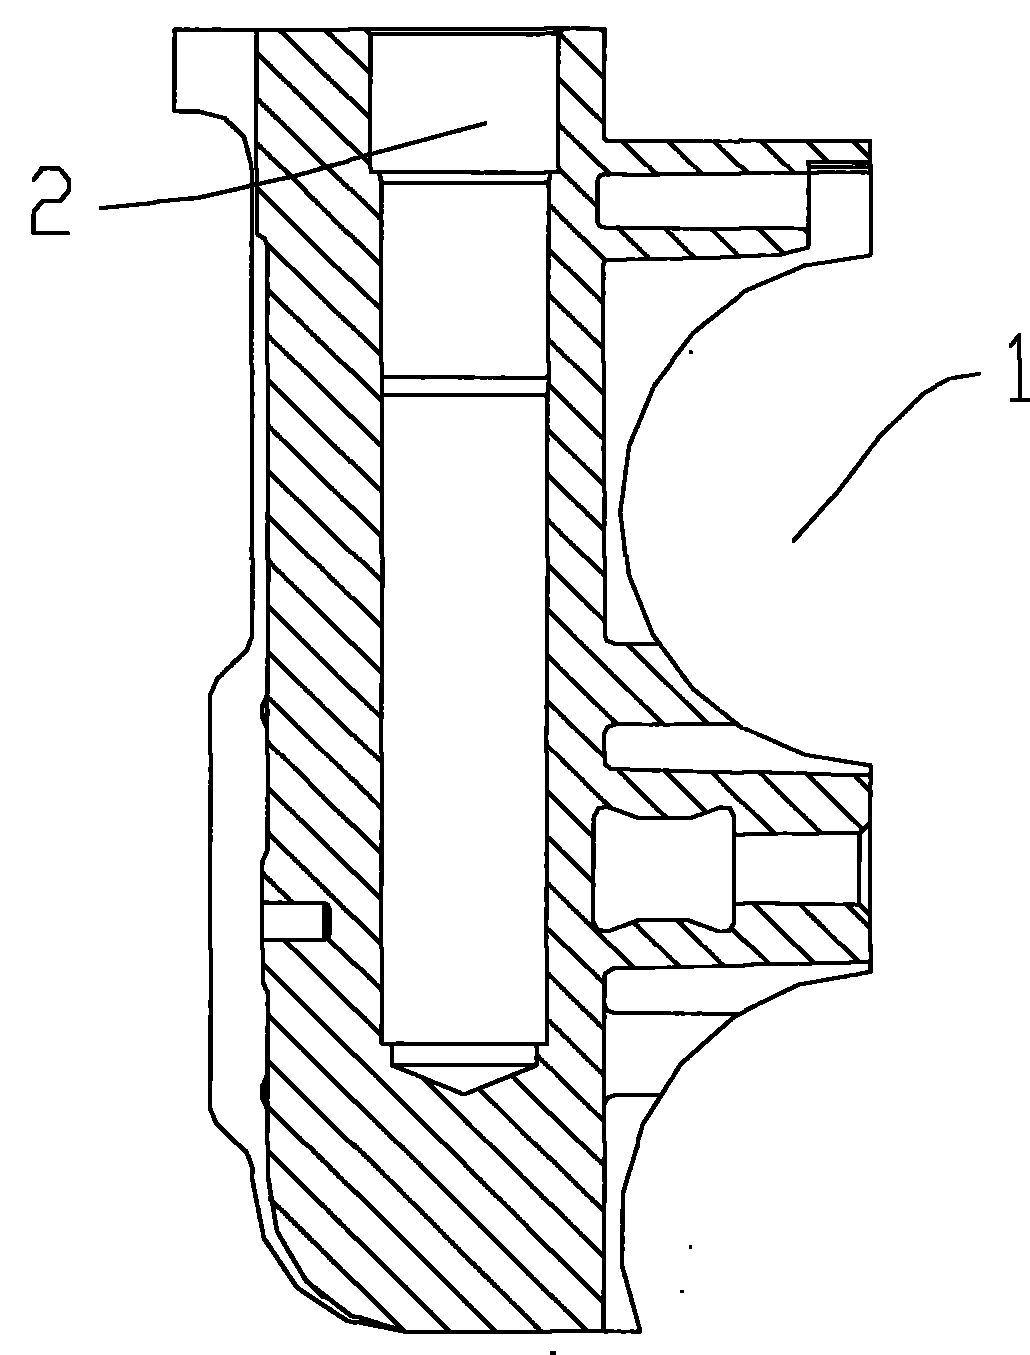 Method for processing bearing support